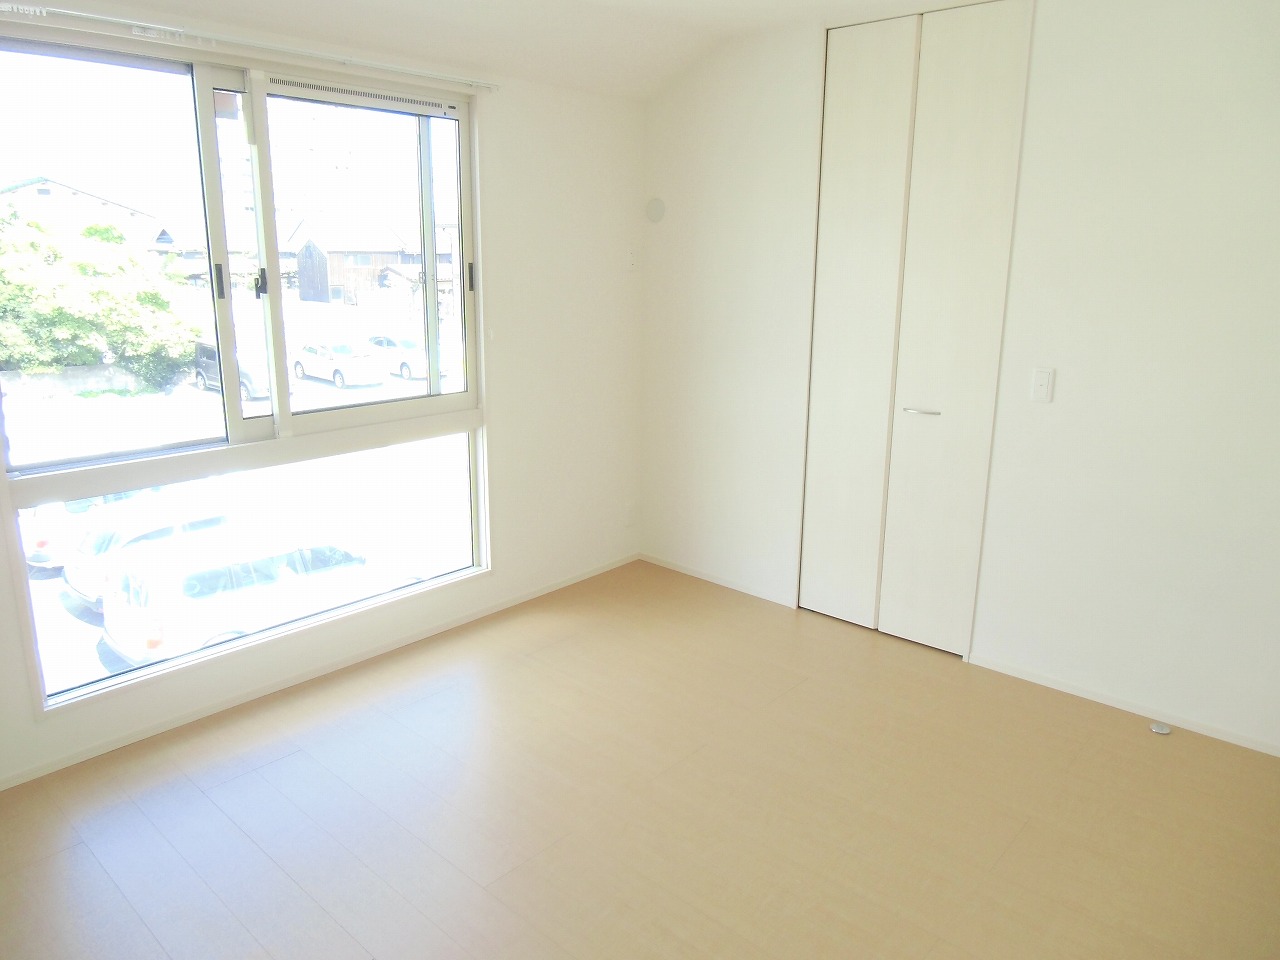 Other room space. It is similar to Listing